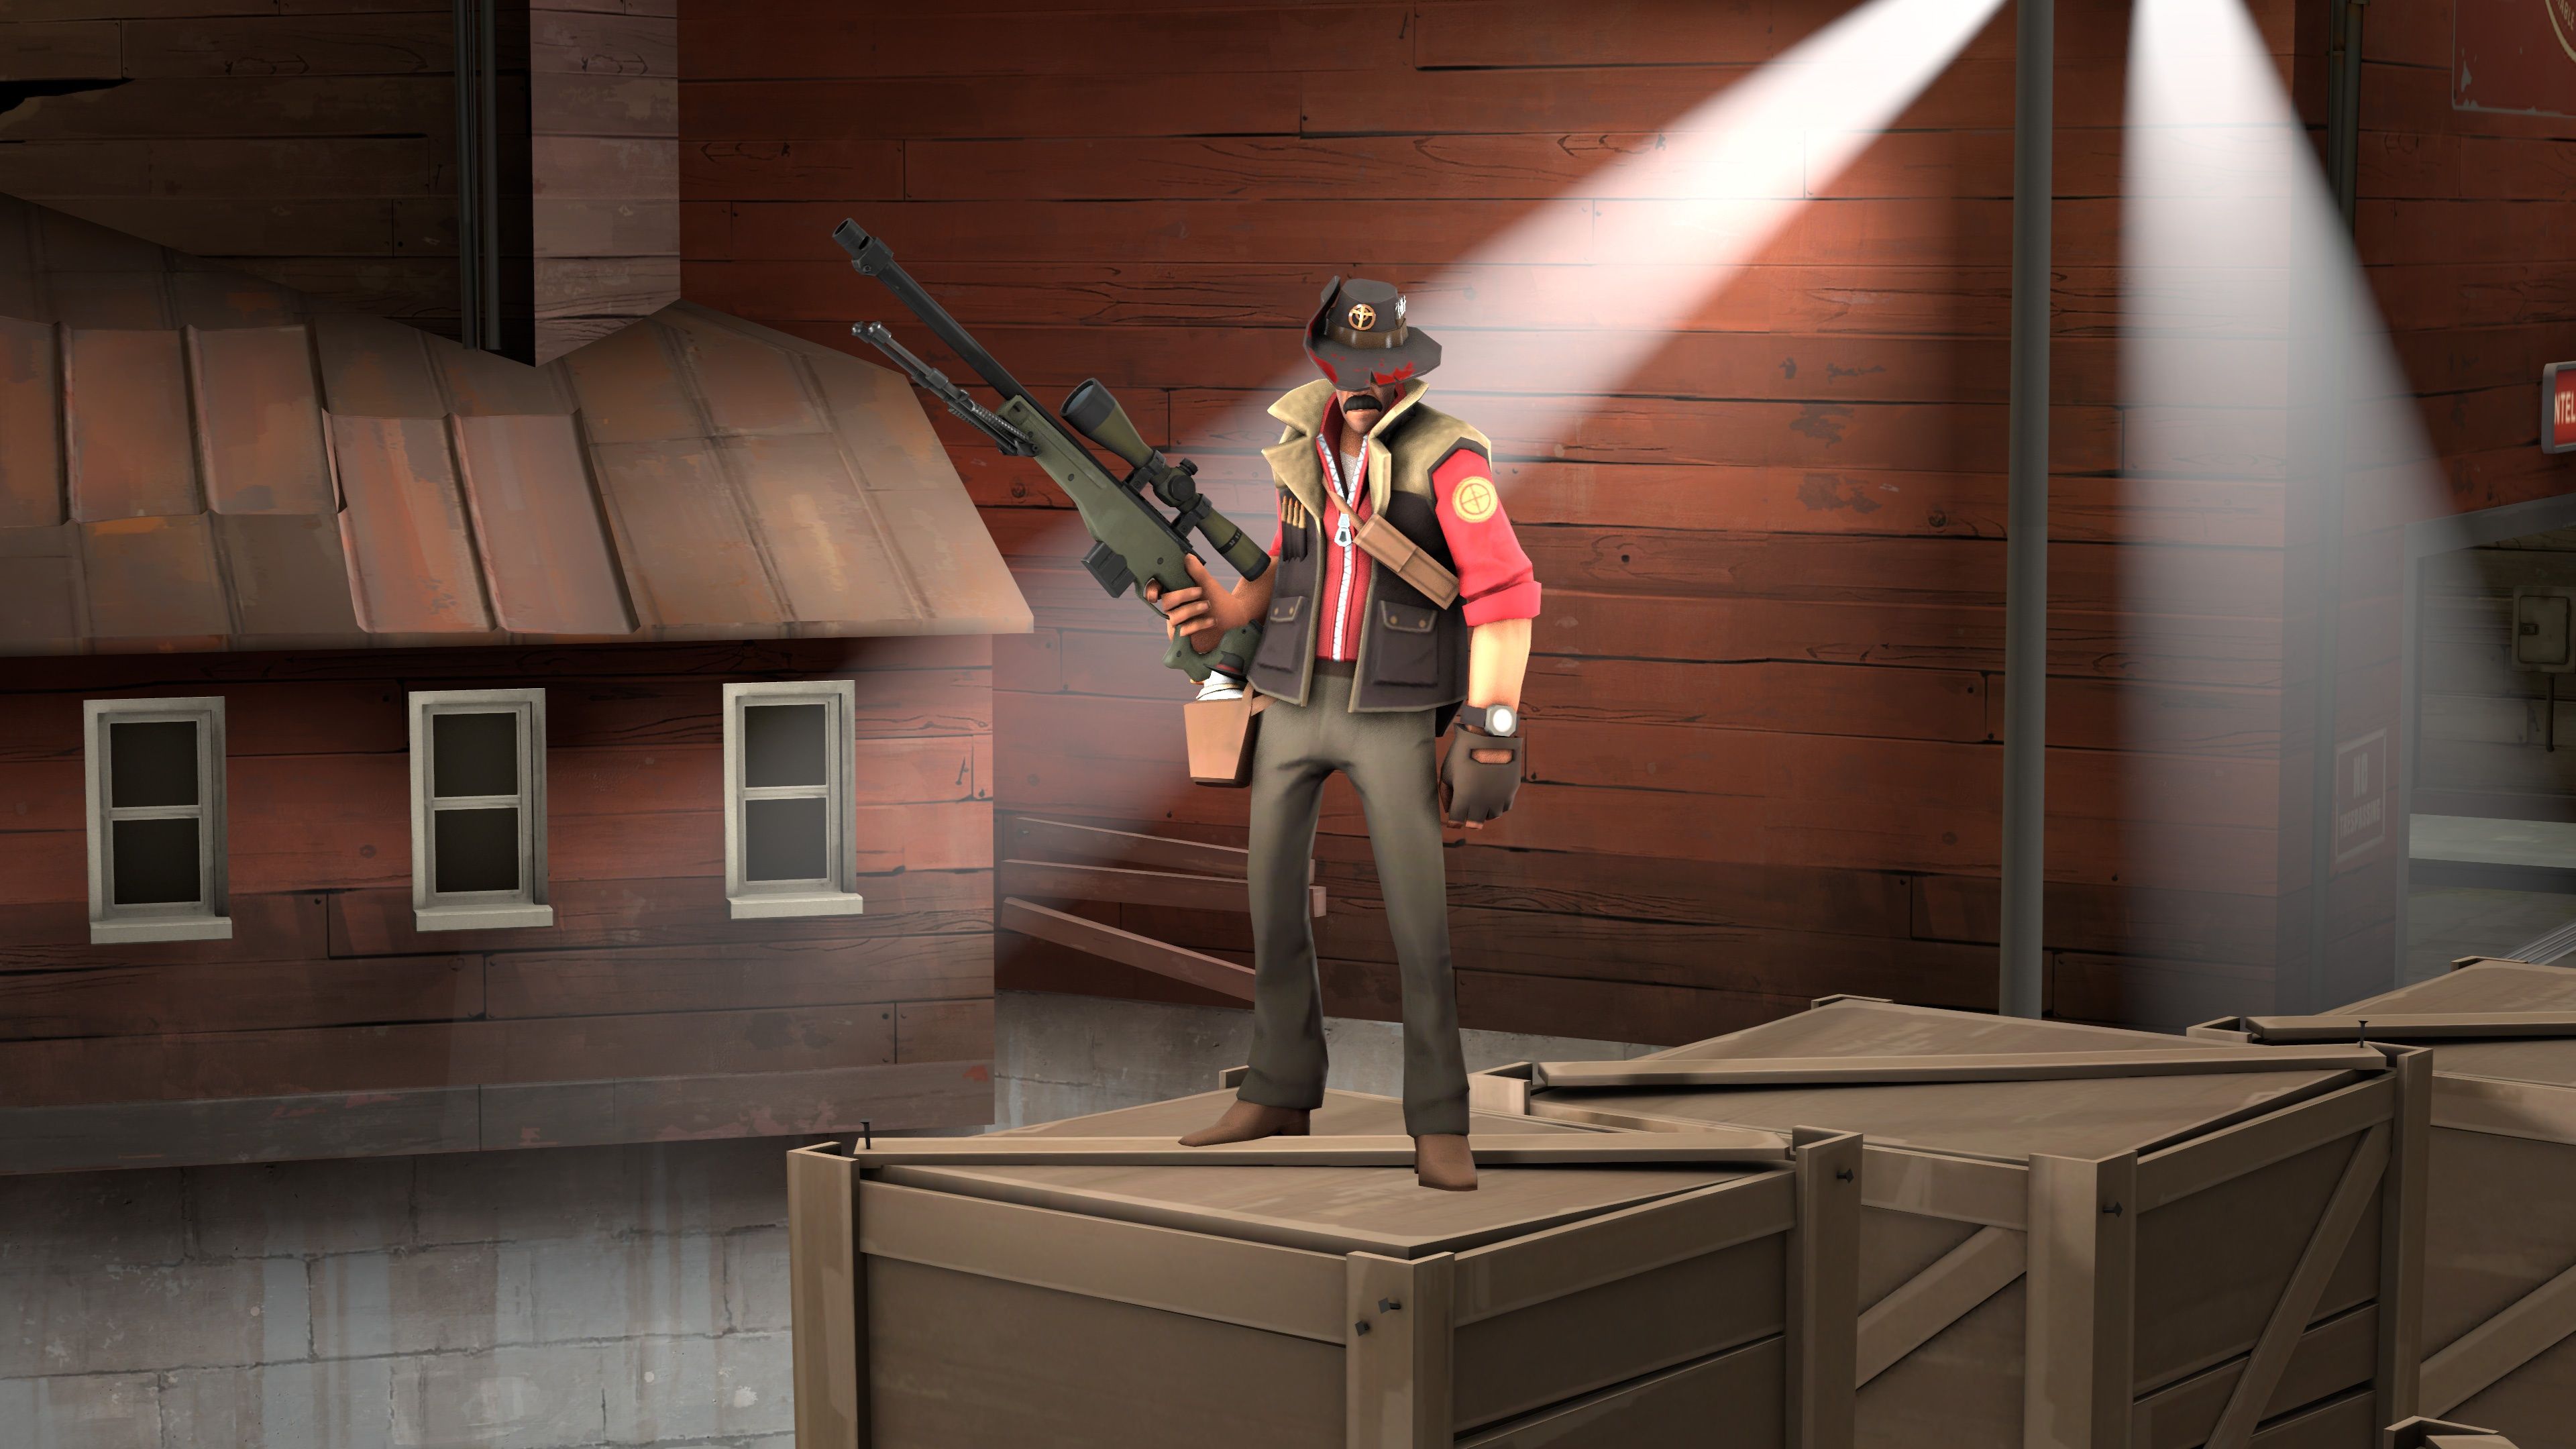 Team Fortress 2 4K Wallpaper in jpg format for free download